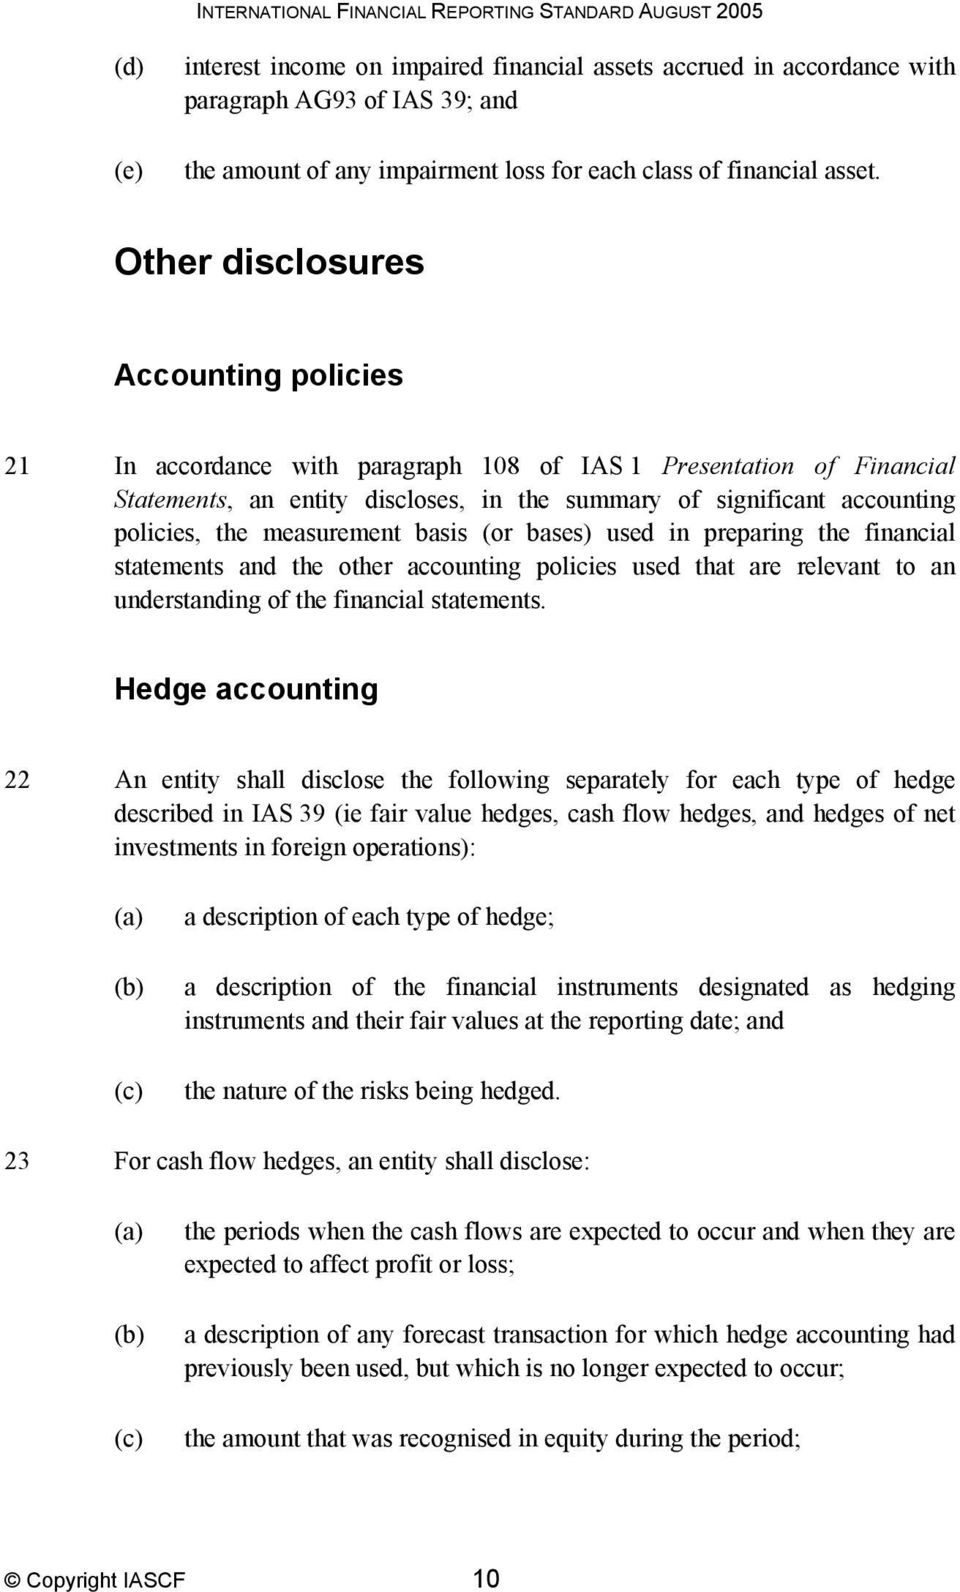 Other disclosures Accounting policies 21 In accordance with paragraph 108 of IAS 1 Presentation of Financial Statements, an entity discloses, in the summary of significant accounting policies, the